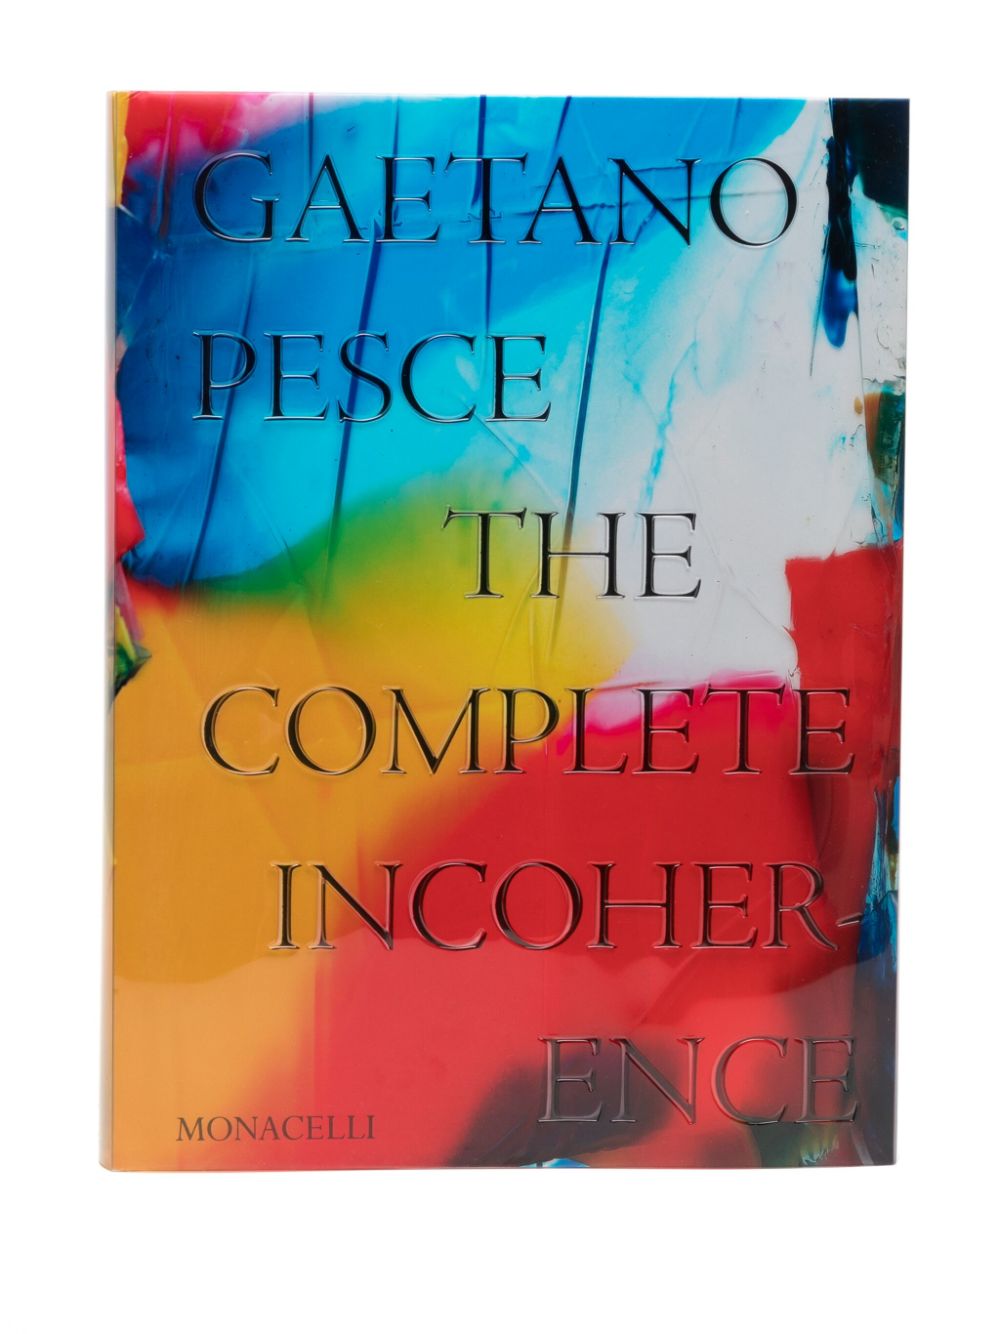 Shop Phaidon Press Gaetano Pesce: The Complete Incoherence